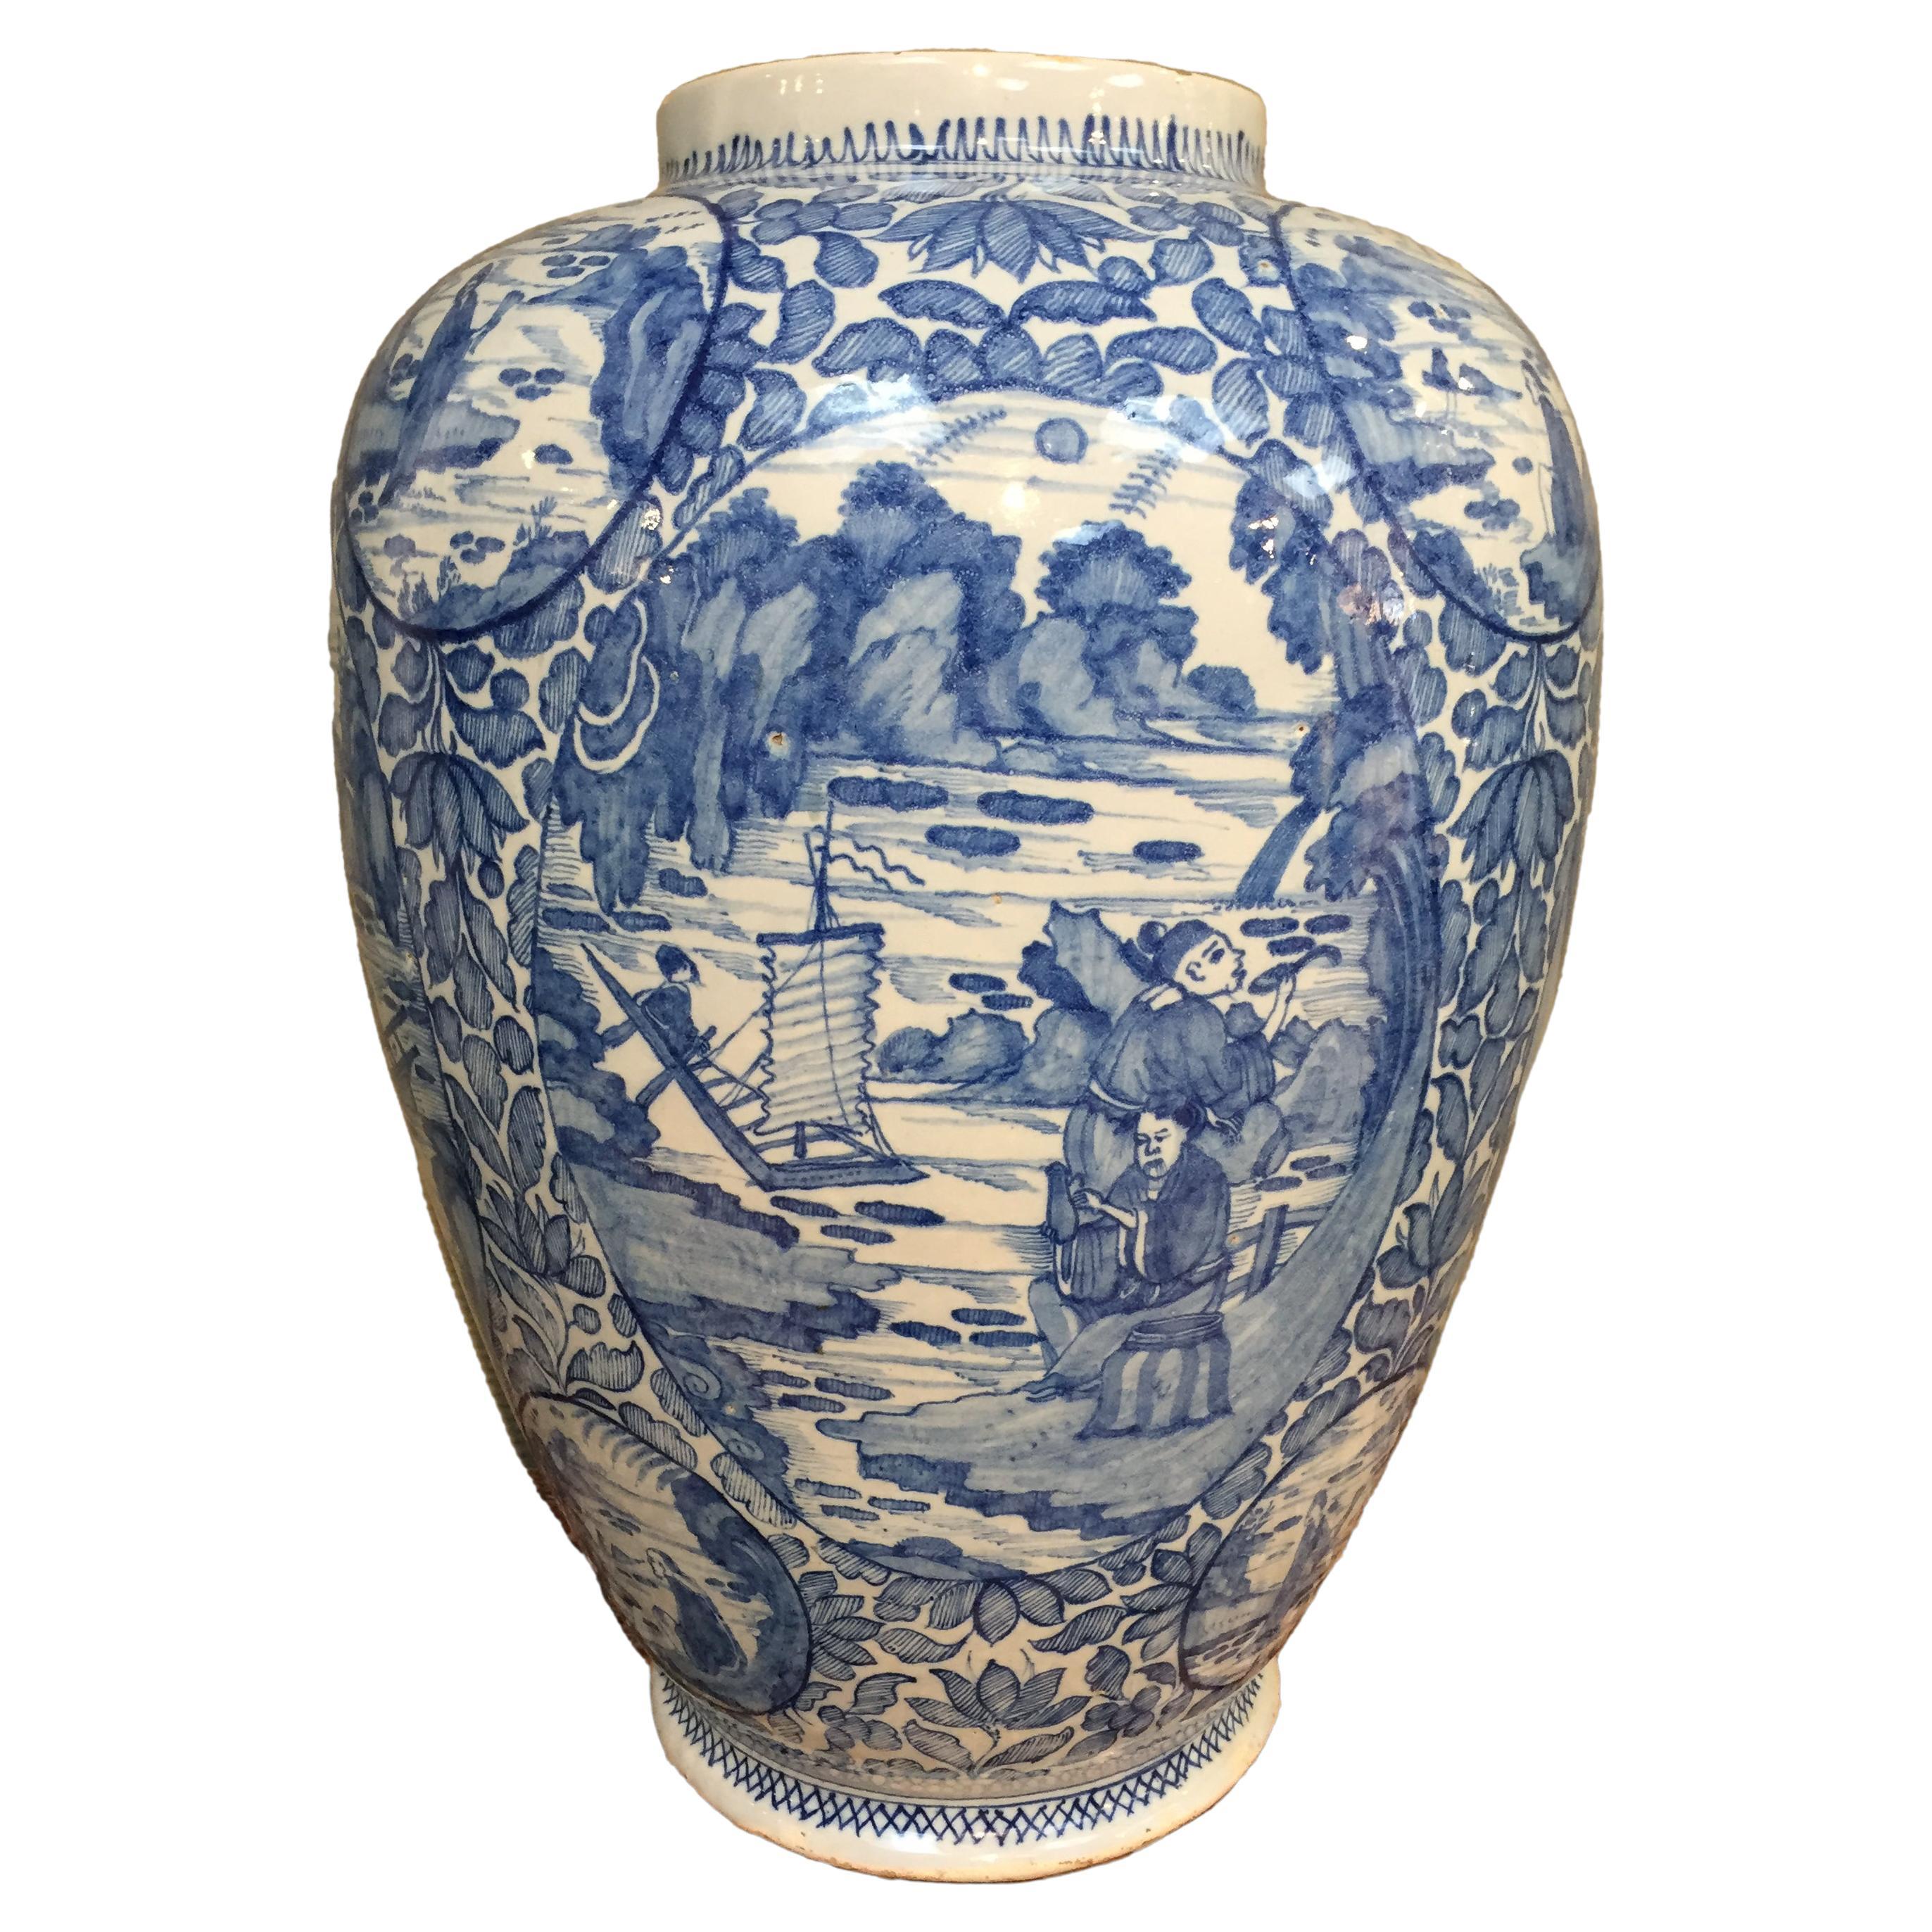 Very Large Blue and White Dutch Delft Vase in Chinoiserie, Early 18th Century For Sale